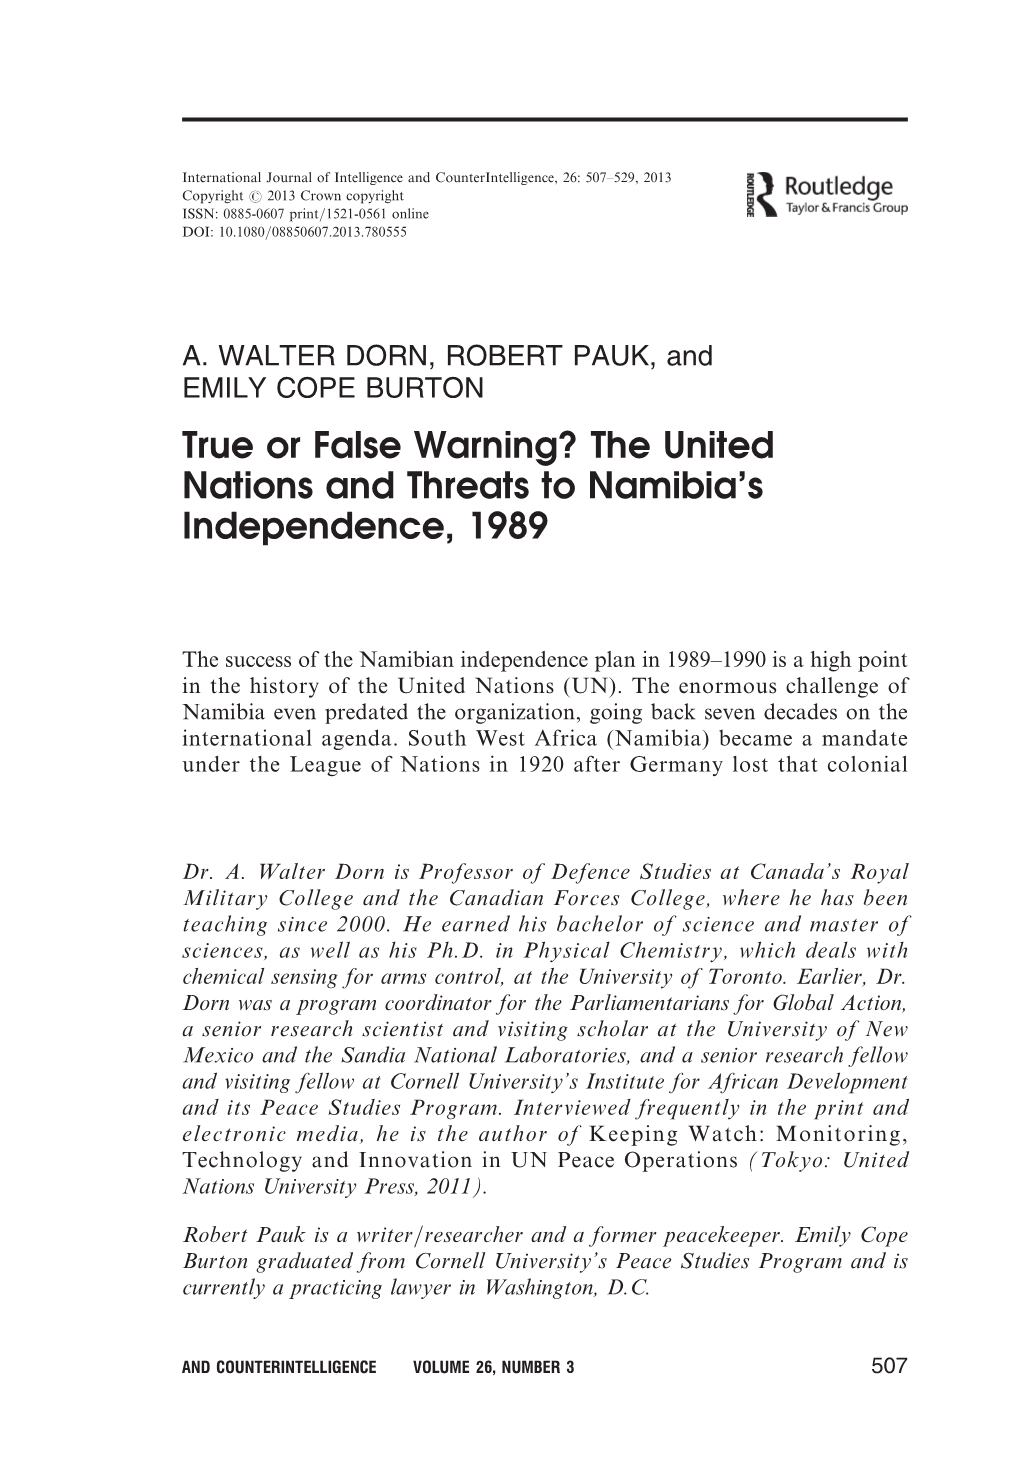 The United Nations and Threats to Namibia's Independence, 1989